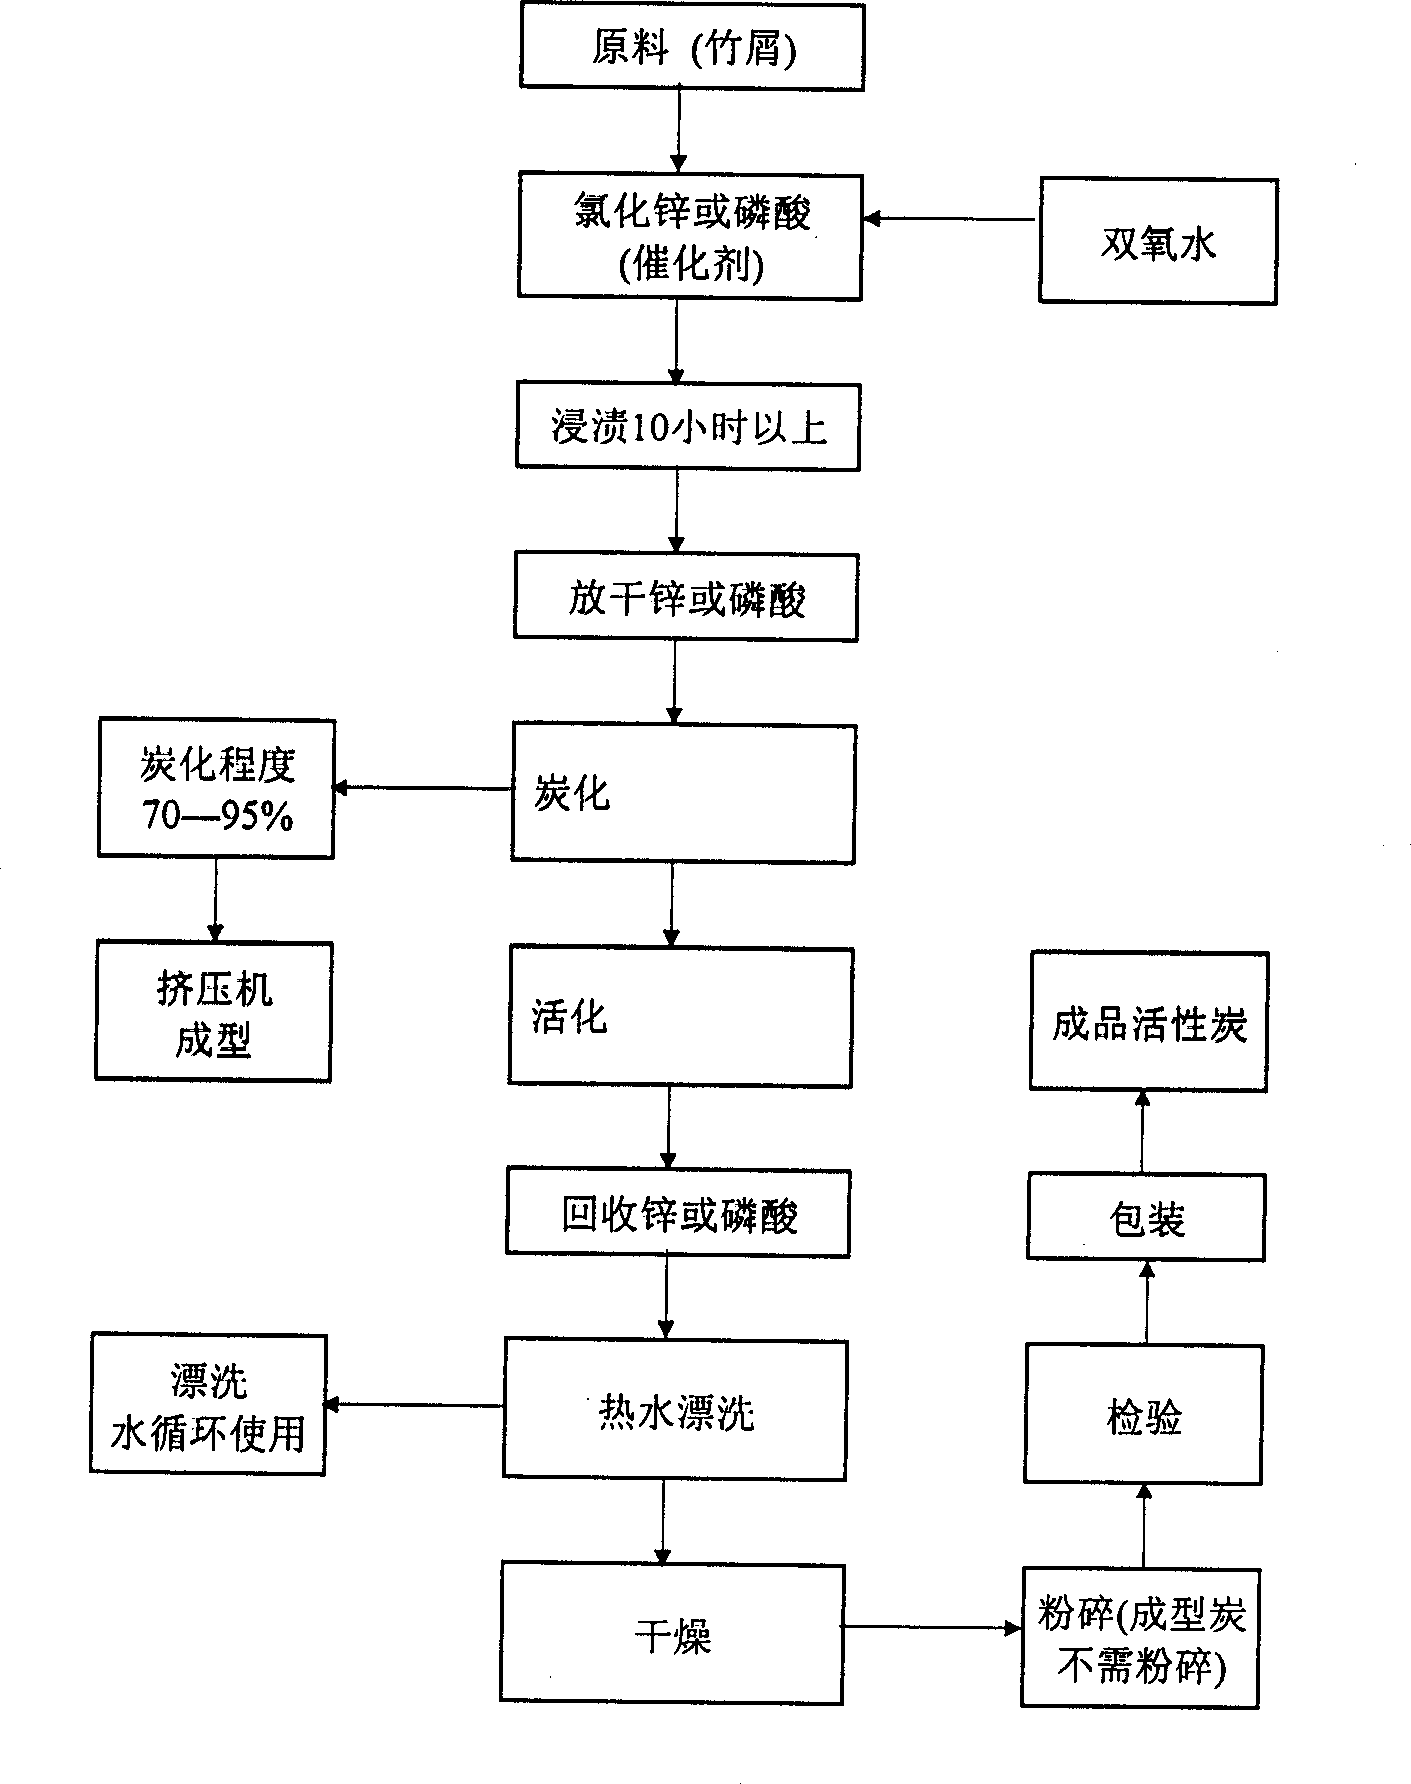 Method for preparing activated char from bamboo material